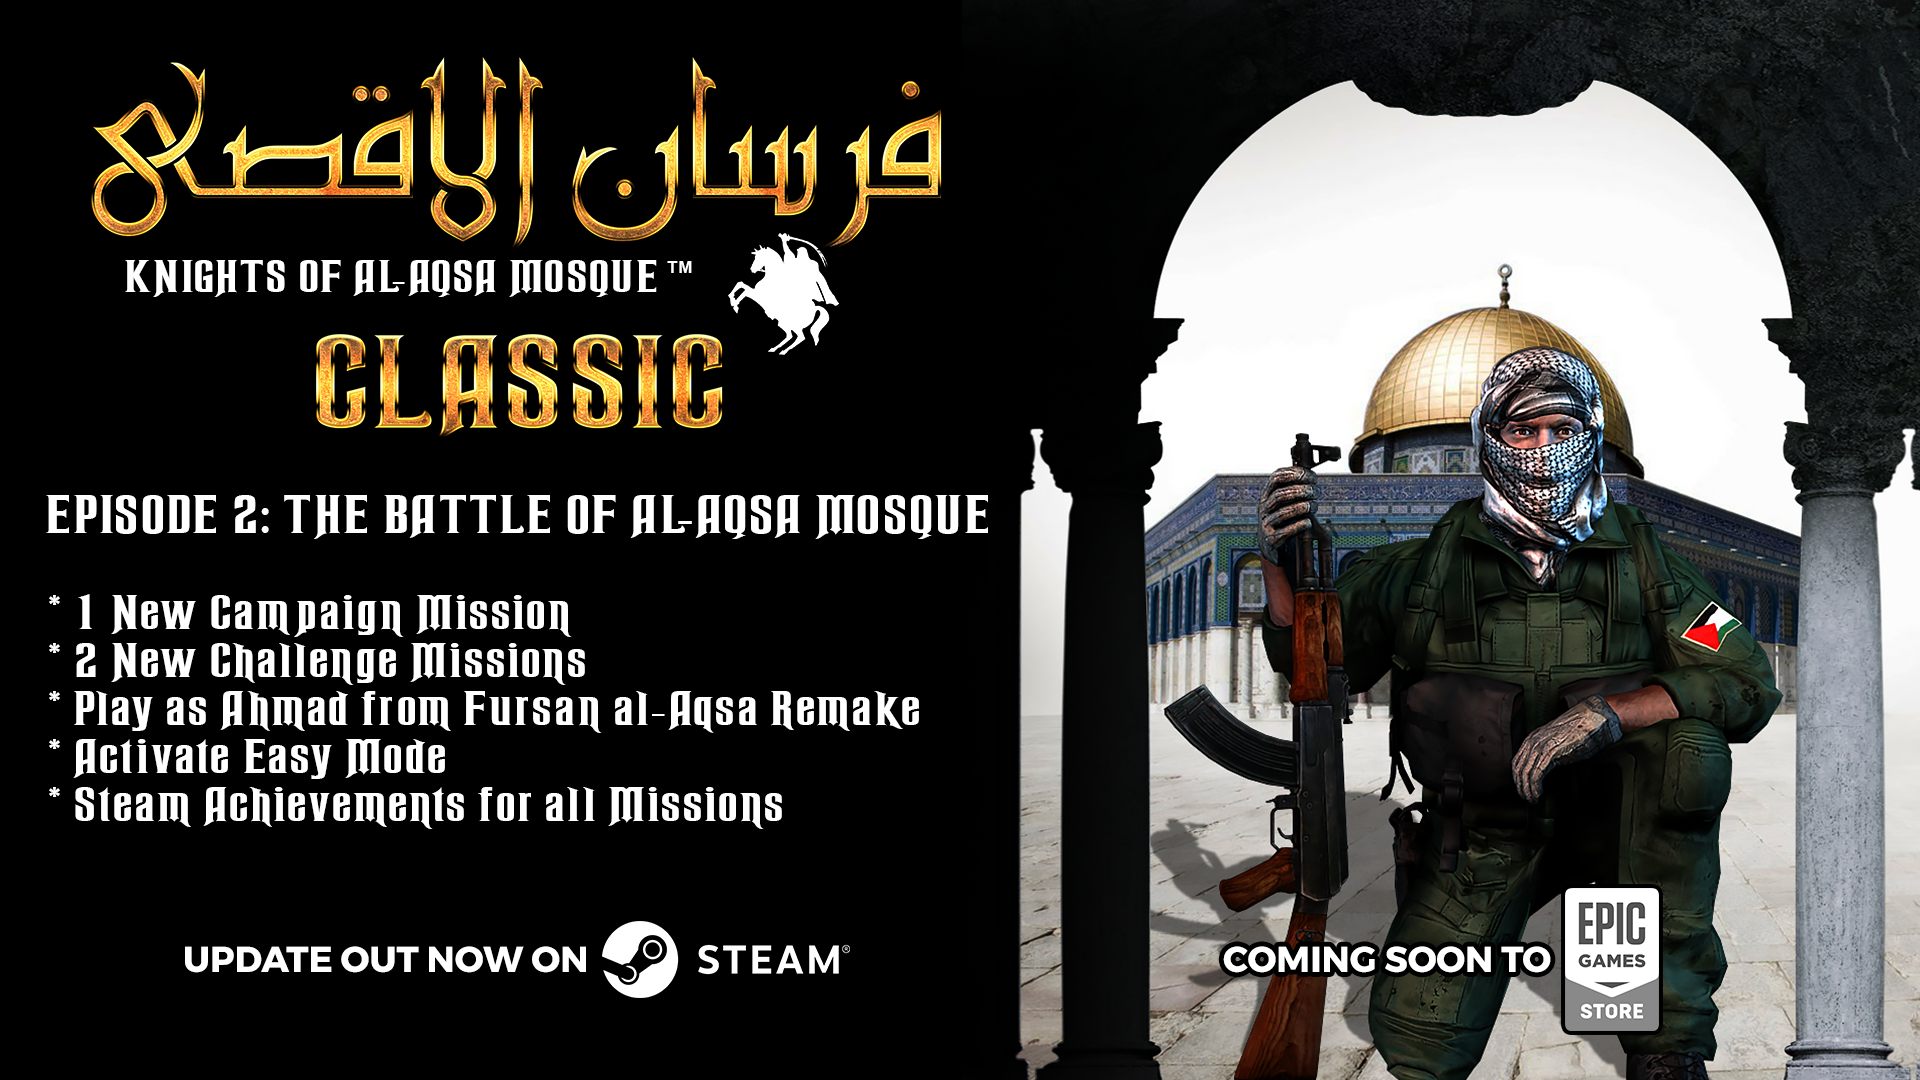 fursan aqsa episode 2 banner 1 - I am developing a game about Palestine Resistance